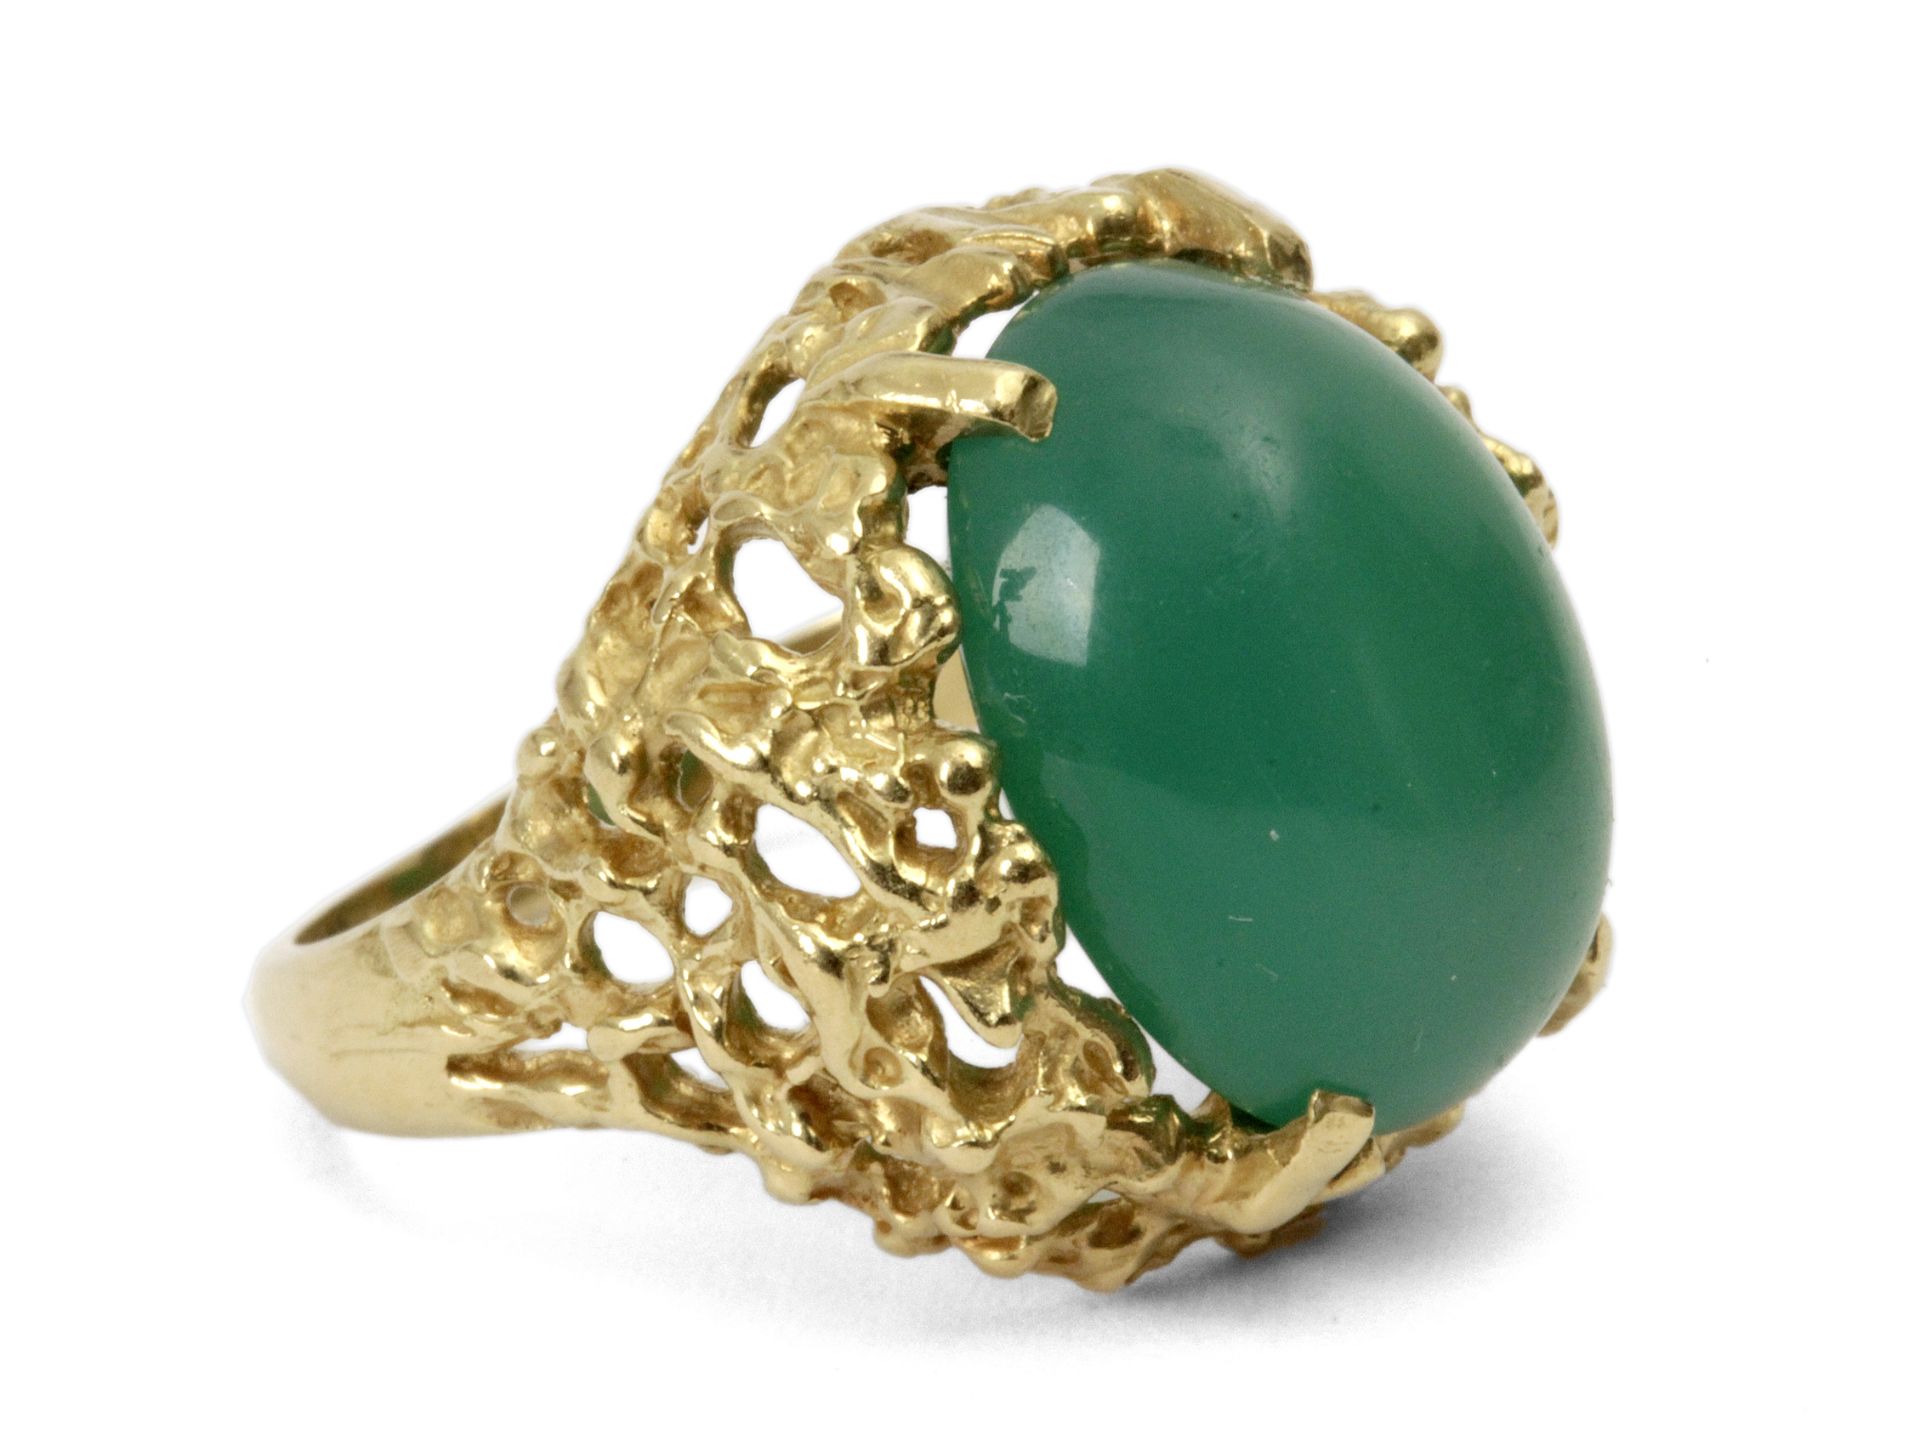 An 18 ct. yellow gold ring with an imitation emerald cabochon